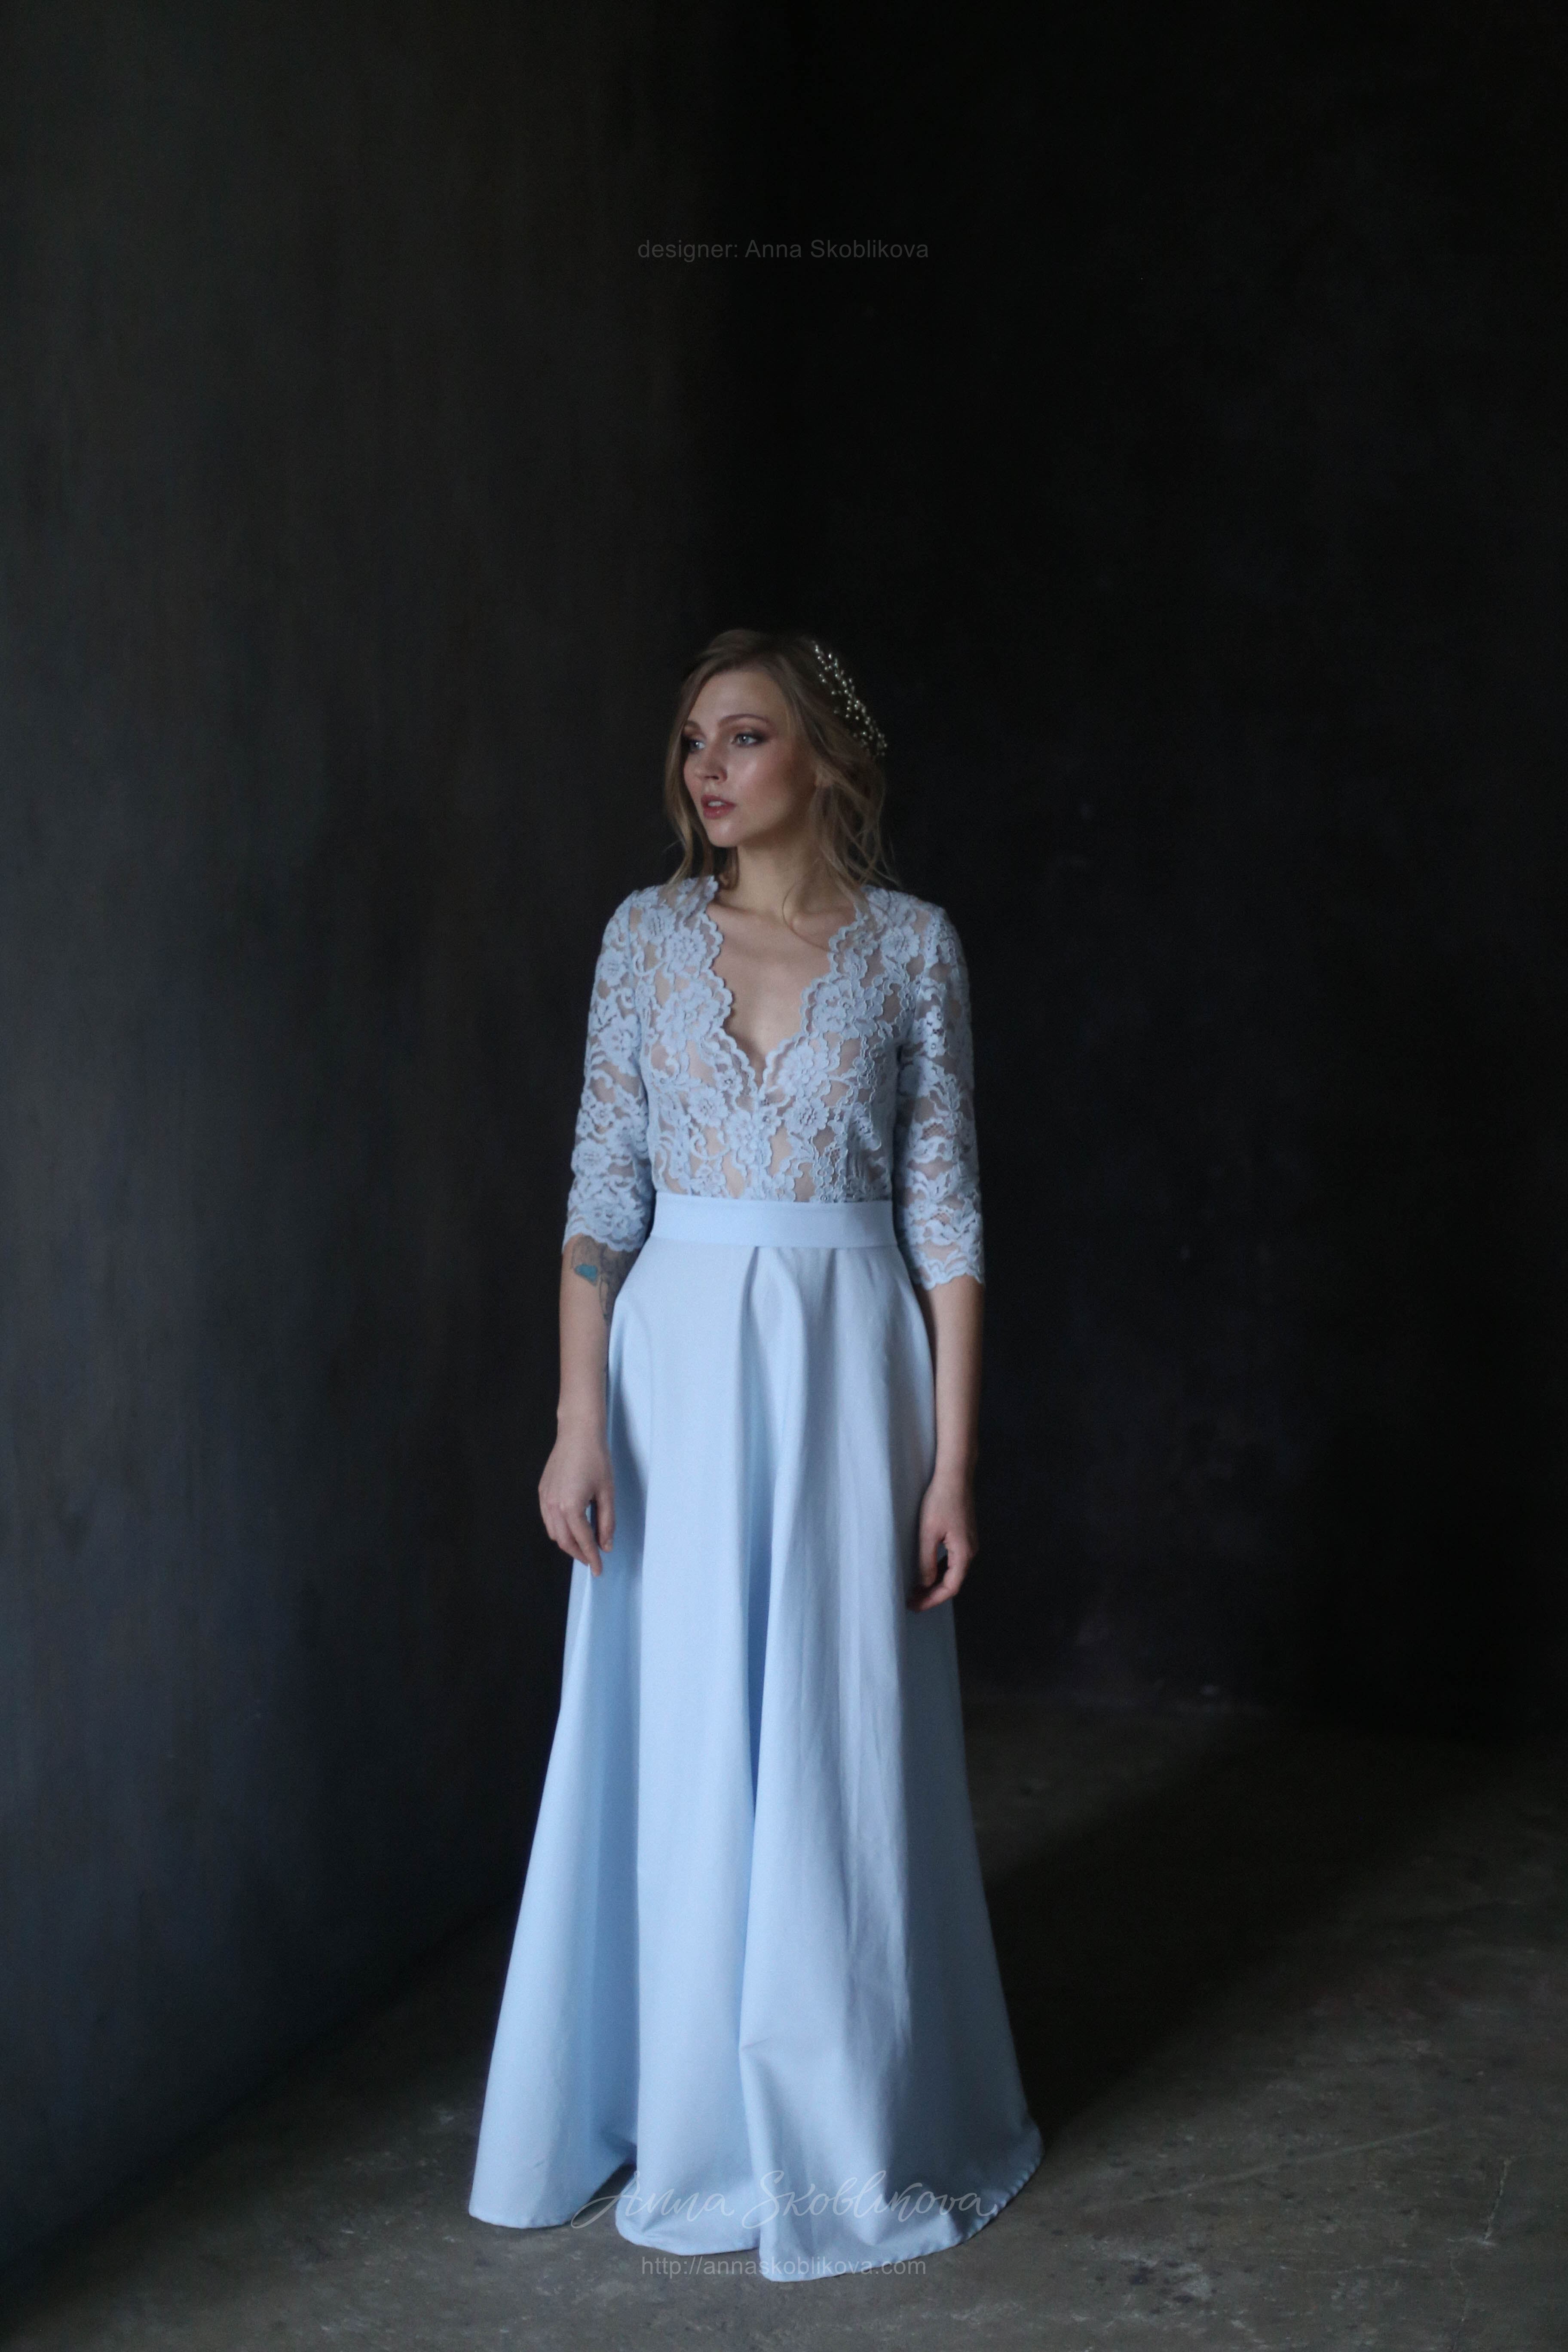 Blue Lace Wedding Gown